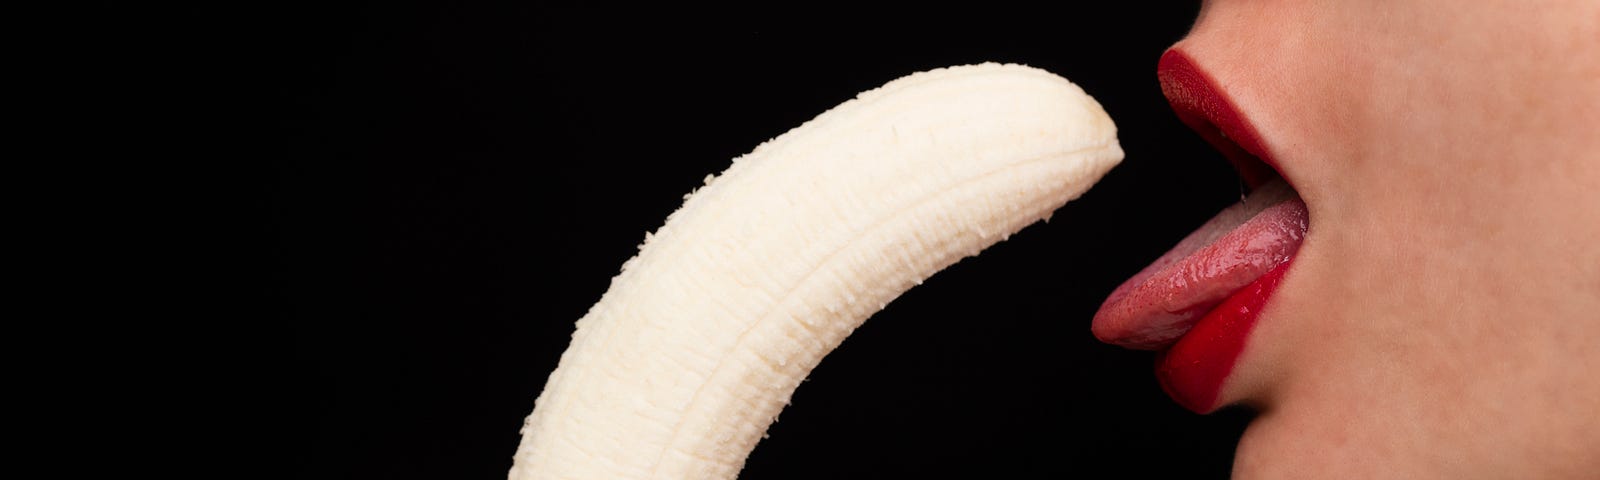 A very suggestive close-up snapshot of a woman about to swallow a freshly peeled banana!